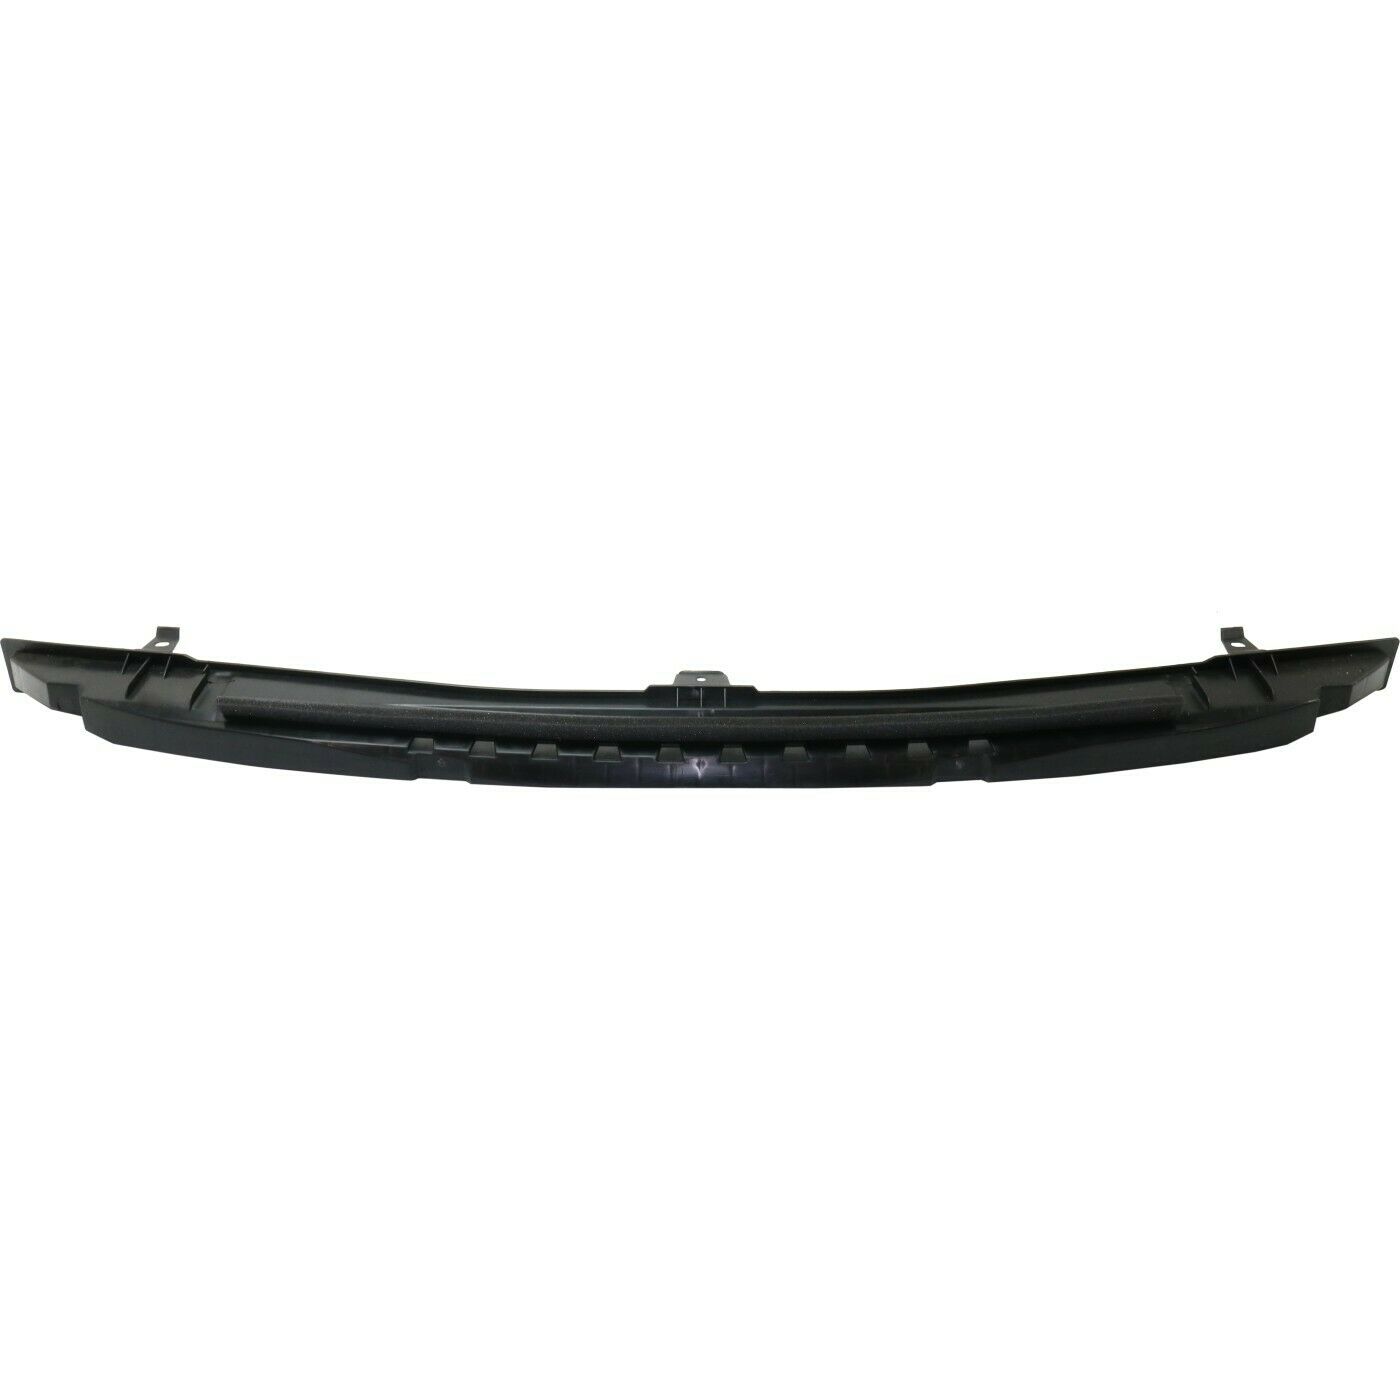 Aftermarket ENERGY ABSORBERS for TOYOTA - PRIUS, PRIUS,16-18,Front bumper energy absorber